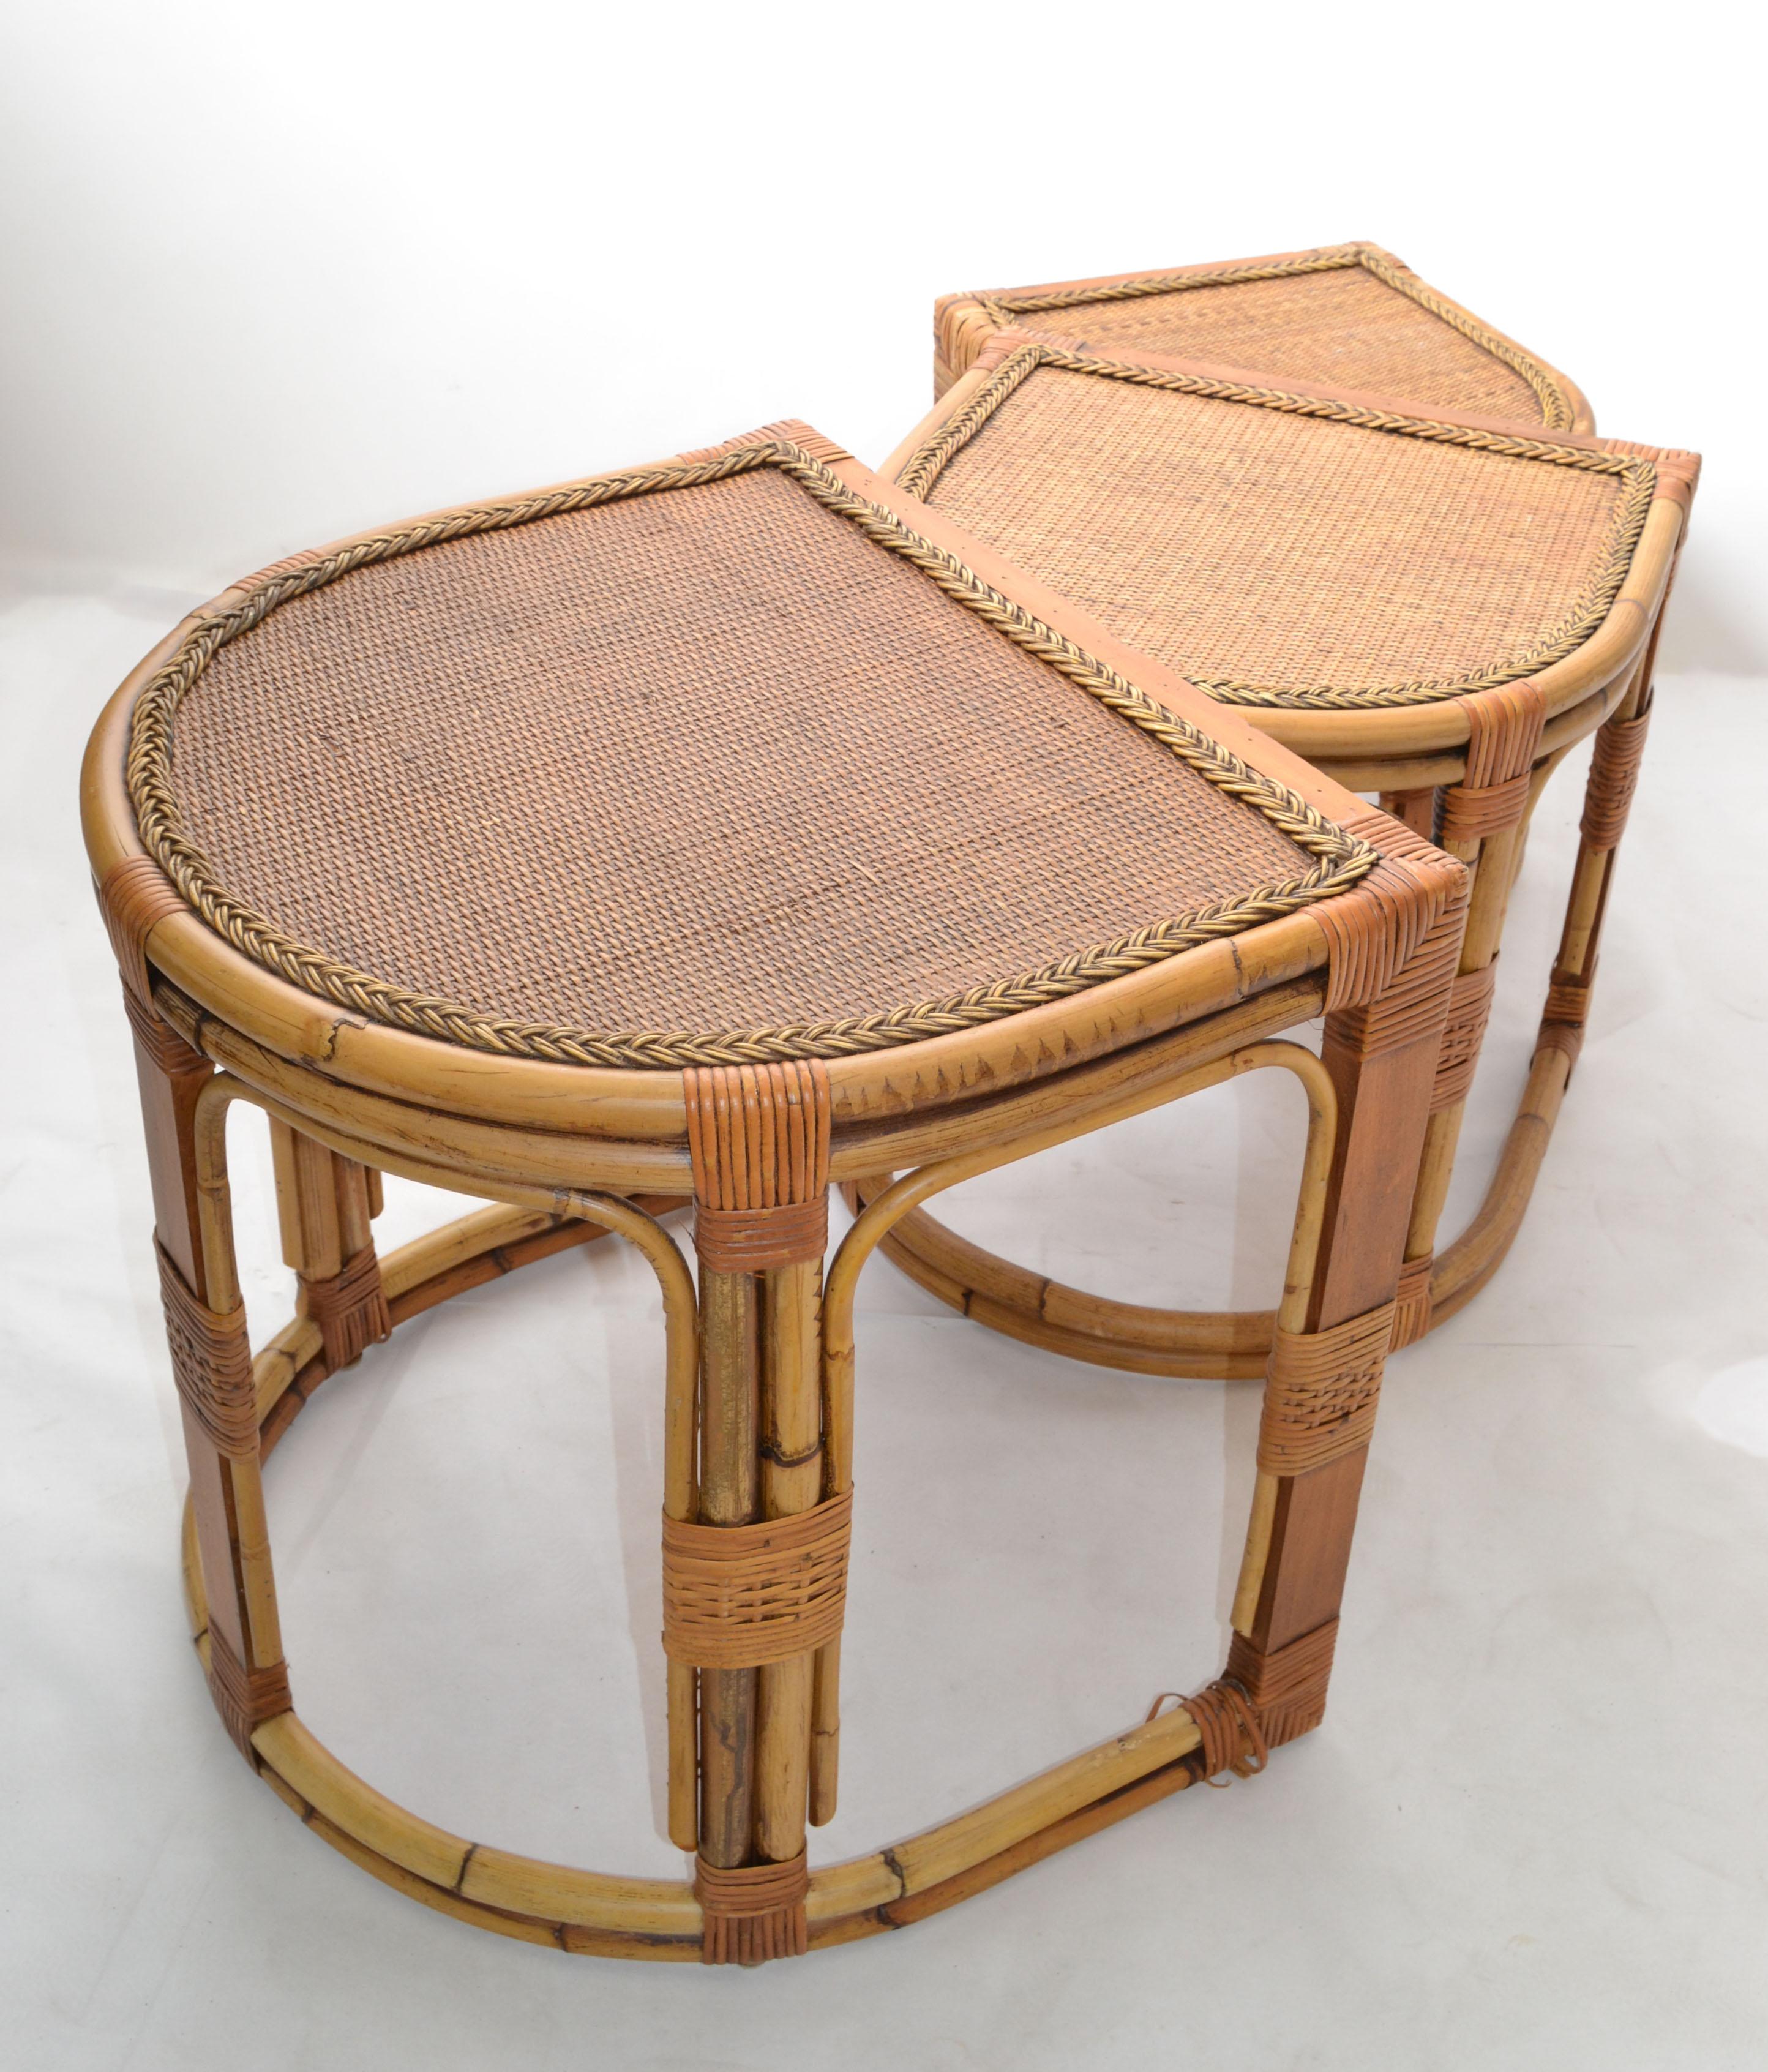 Semi-Circle Bamboo & Cane Nesting Tables / Stacking Tables Handcrafted, Set of 3 For Sale 6